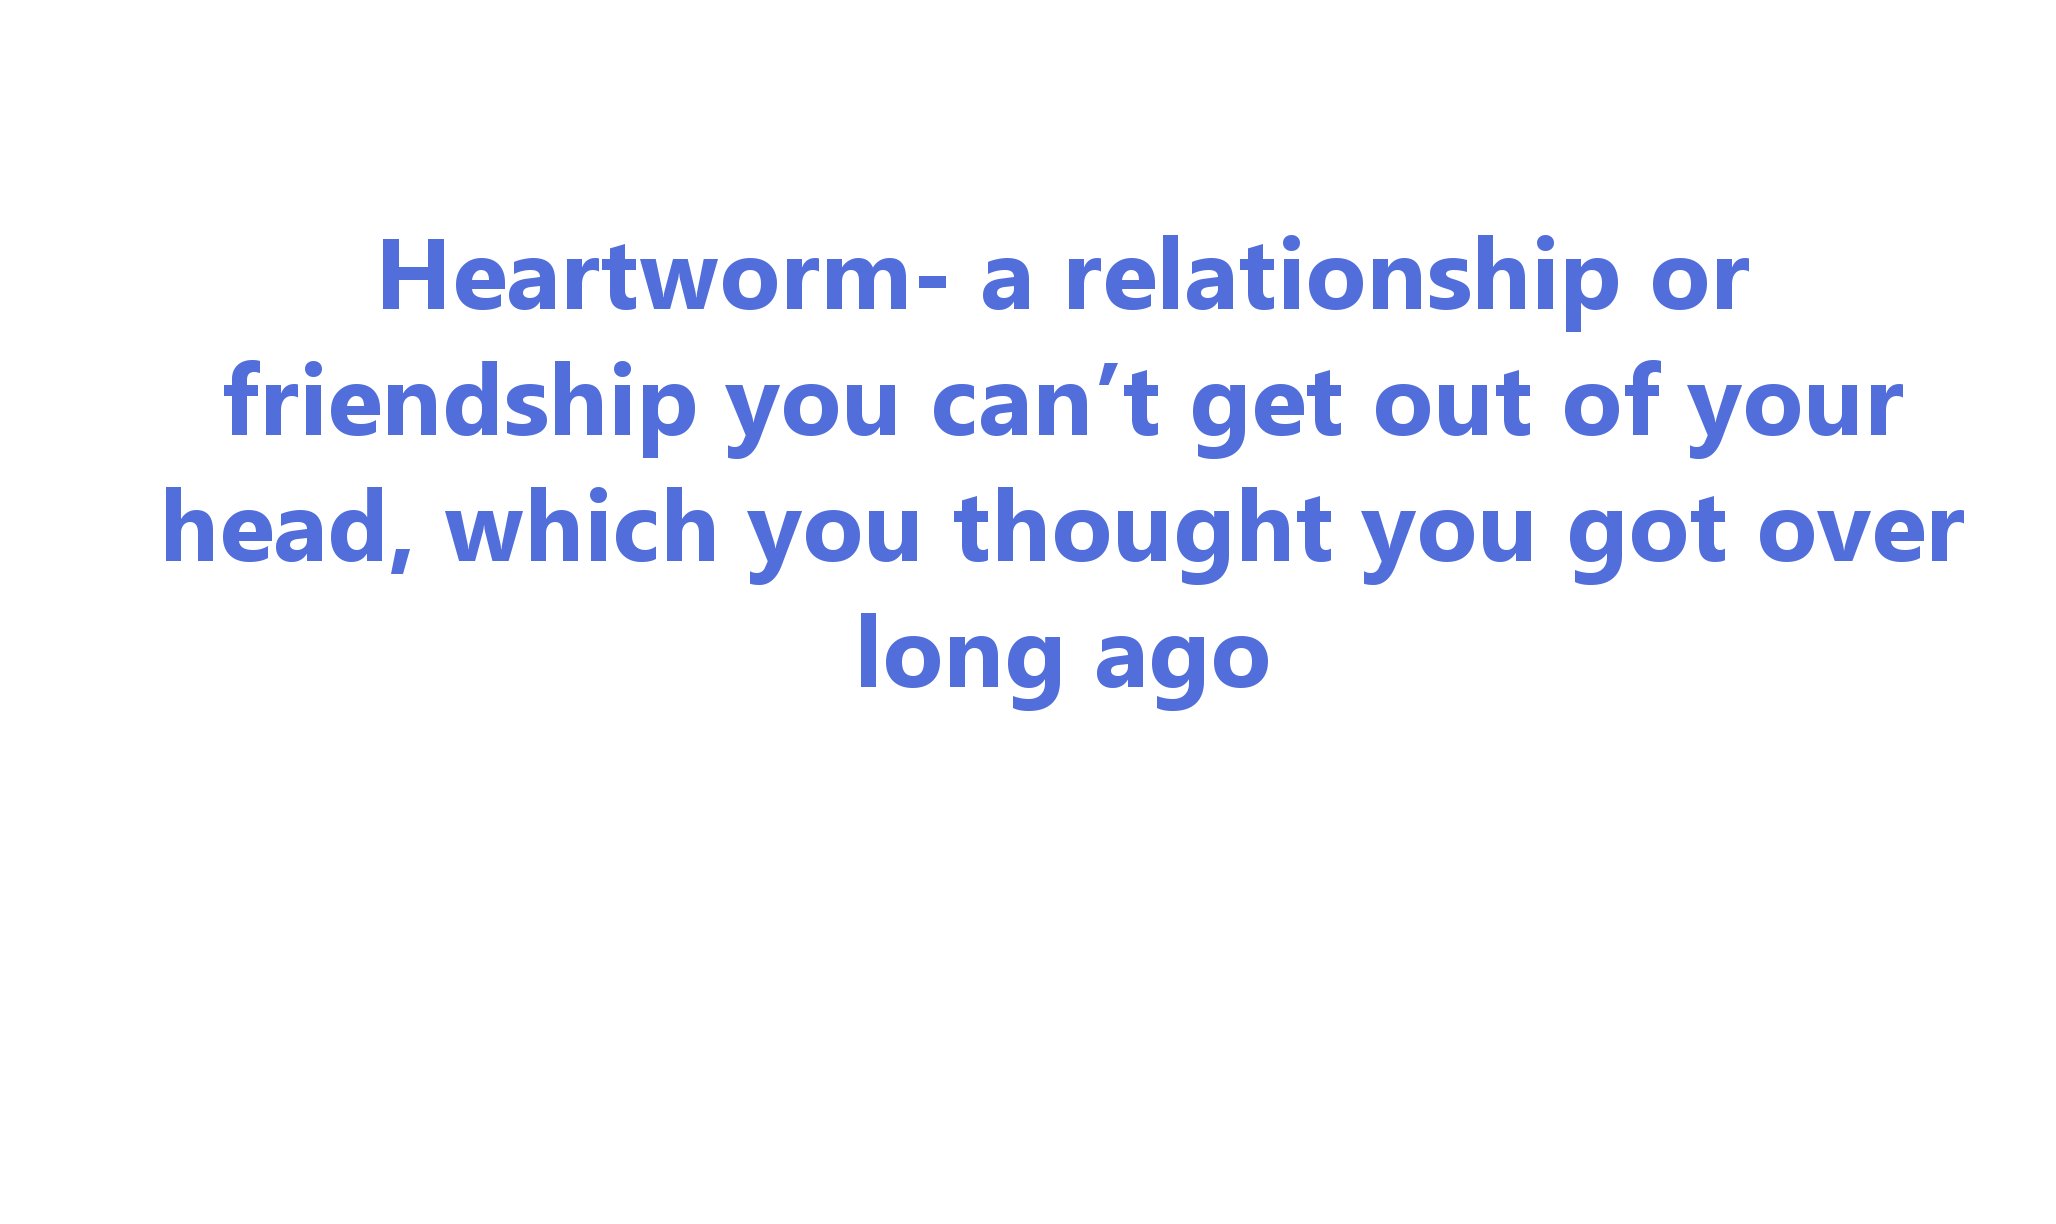 angle - Heartworm a relationship or friendship you can't get out of your head, which you thought you got over long ago